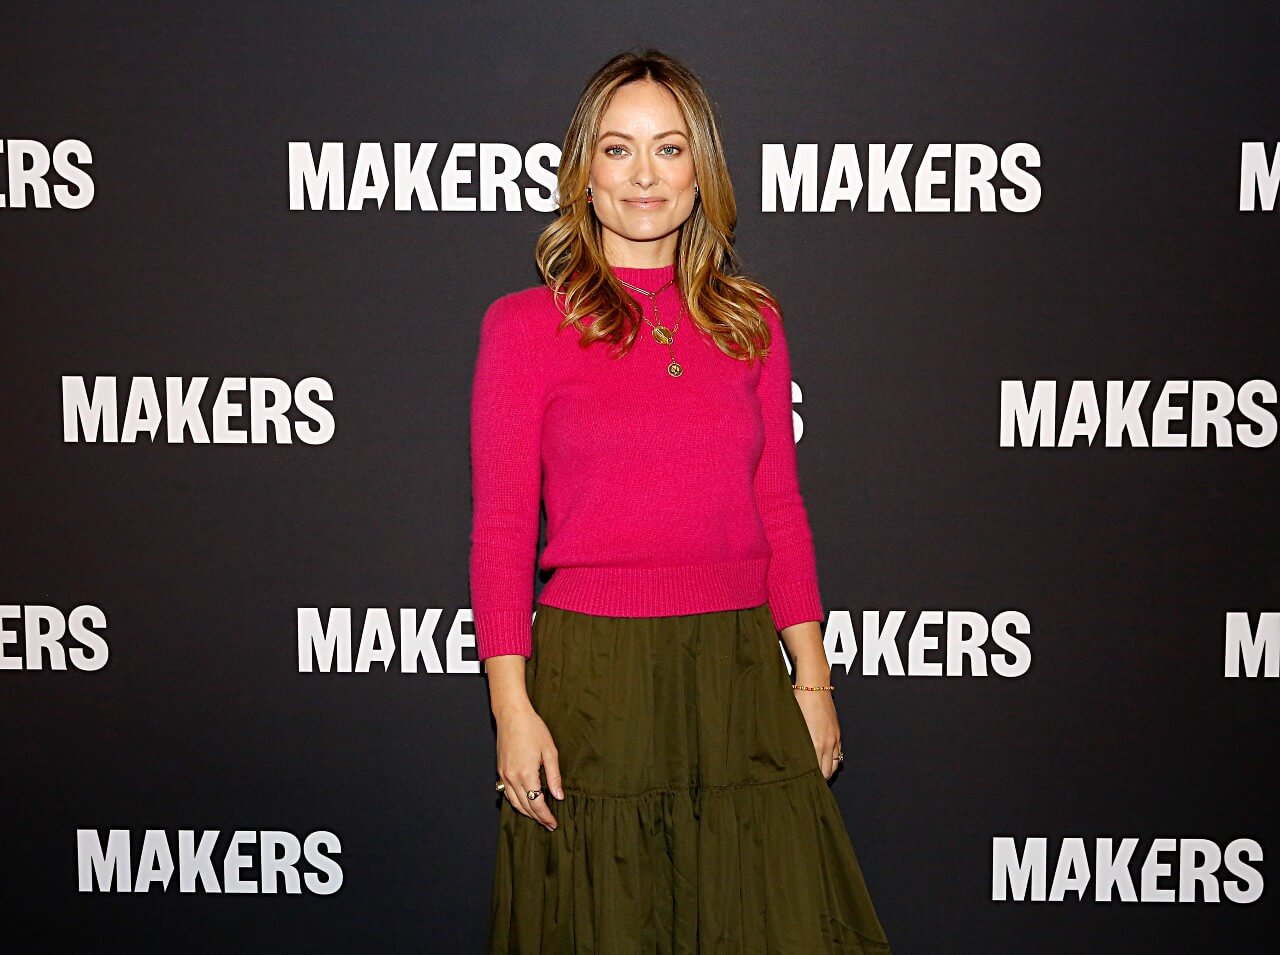 Olivia Wilde wears a red sweater and long skirt while attending an event.